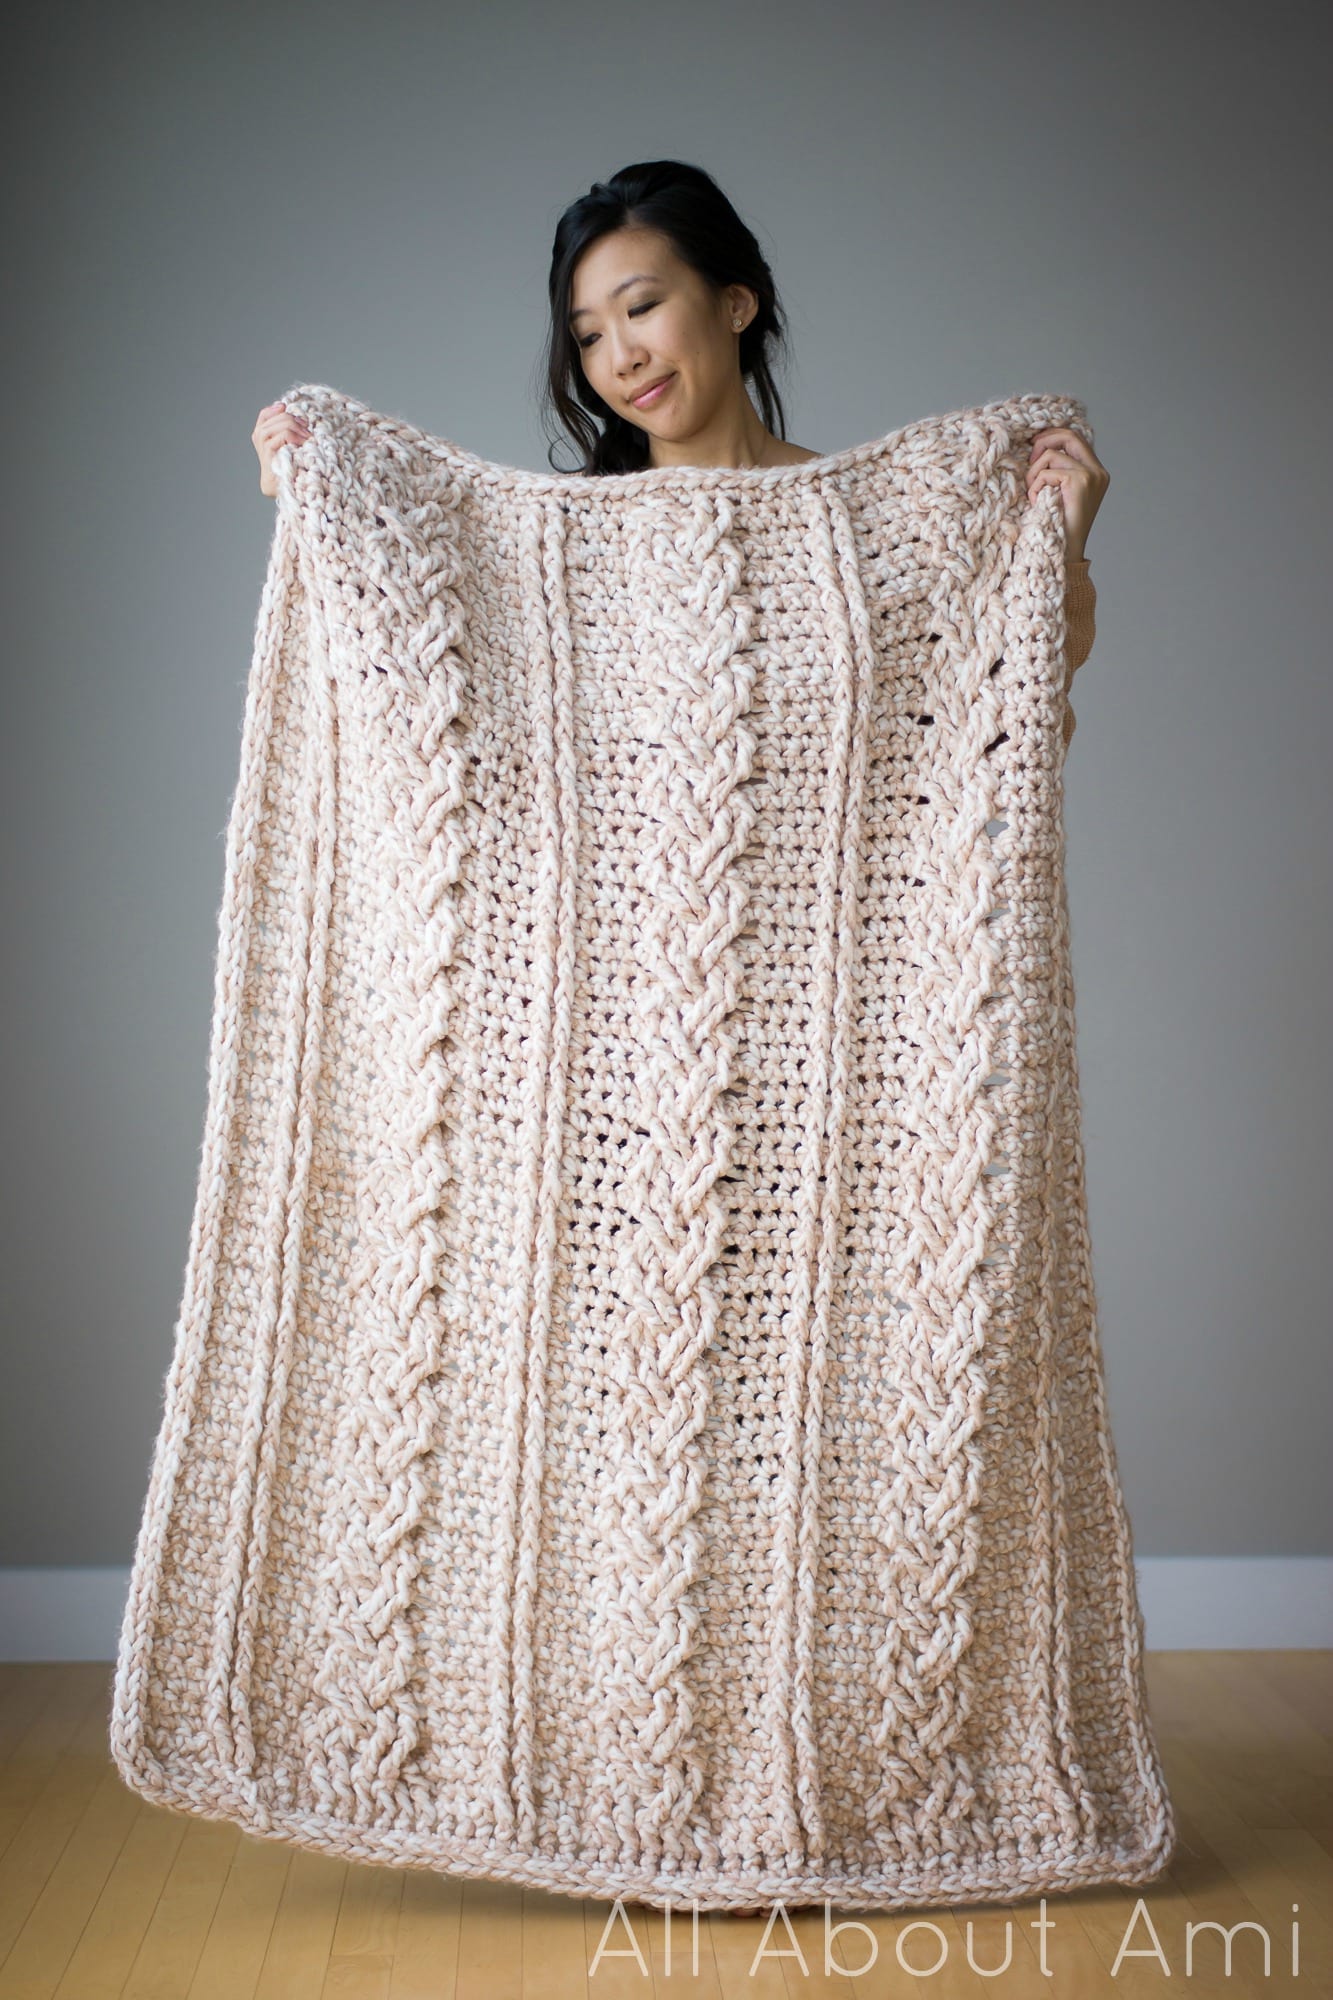 Free knitting pattern for Big Cables Throw afghan in super bulky